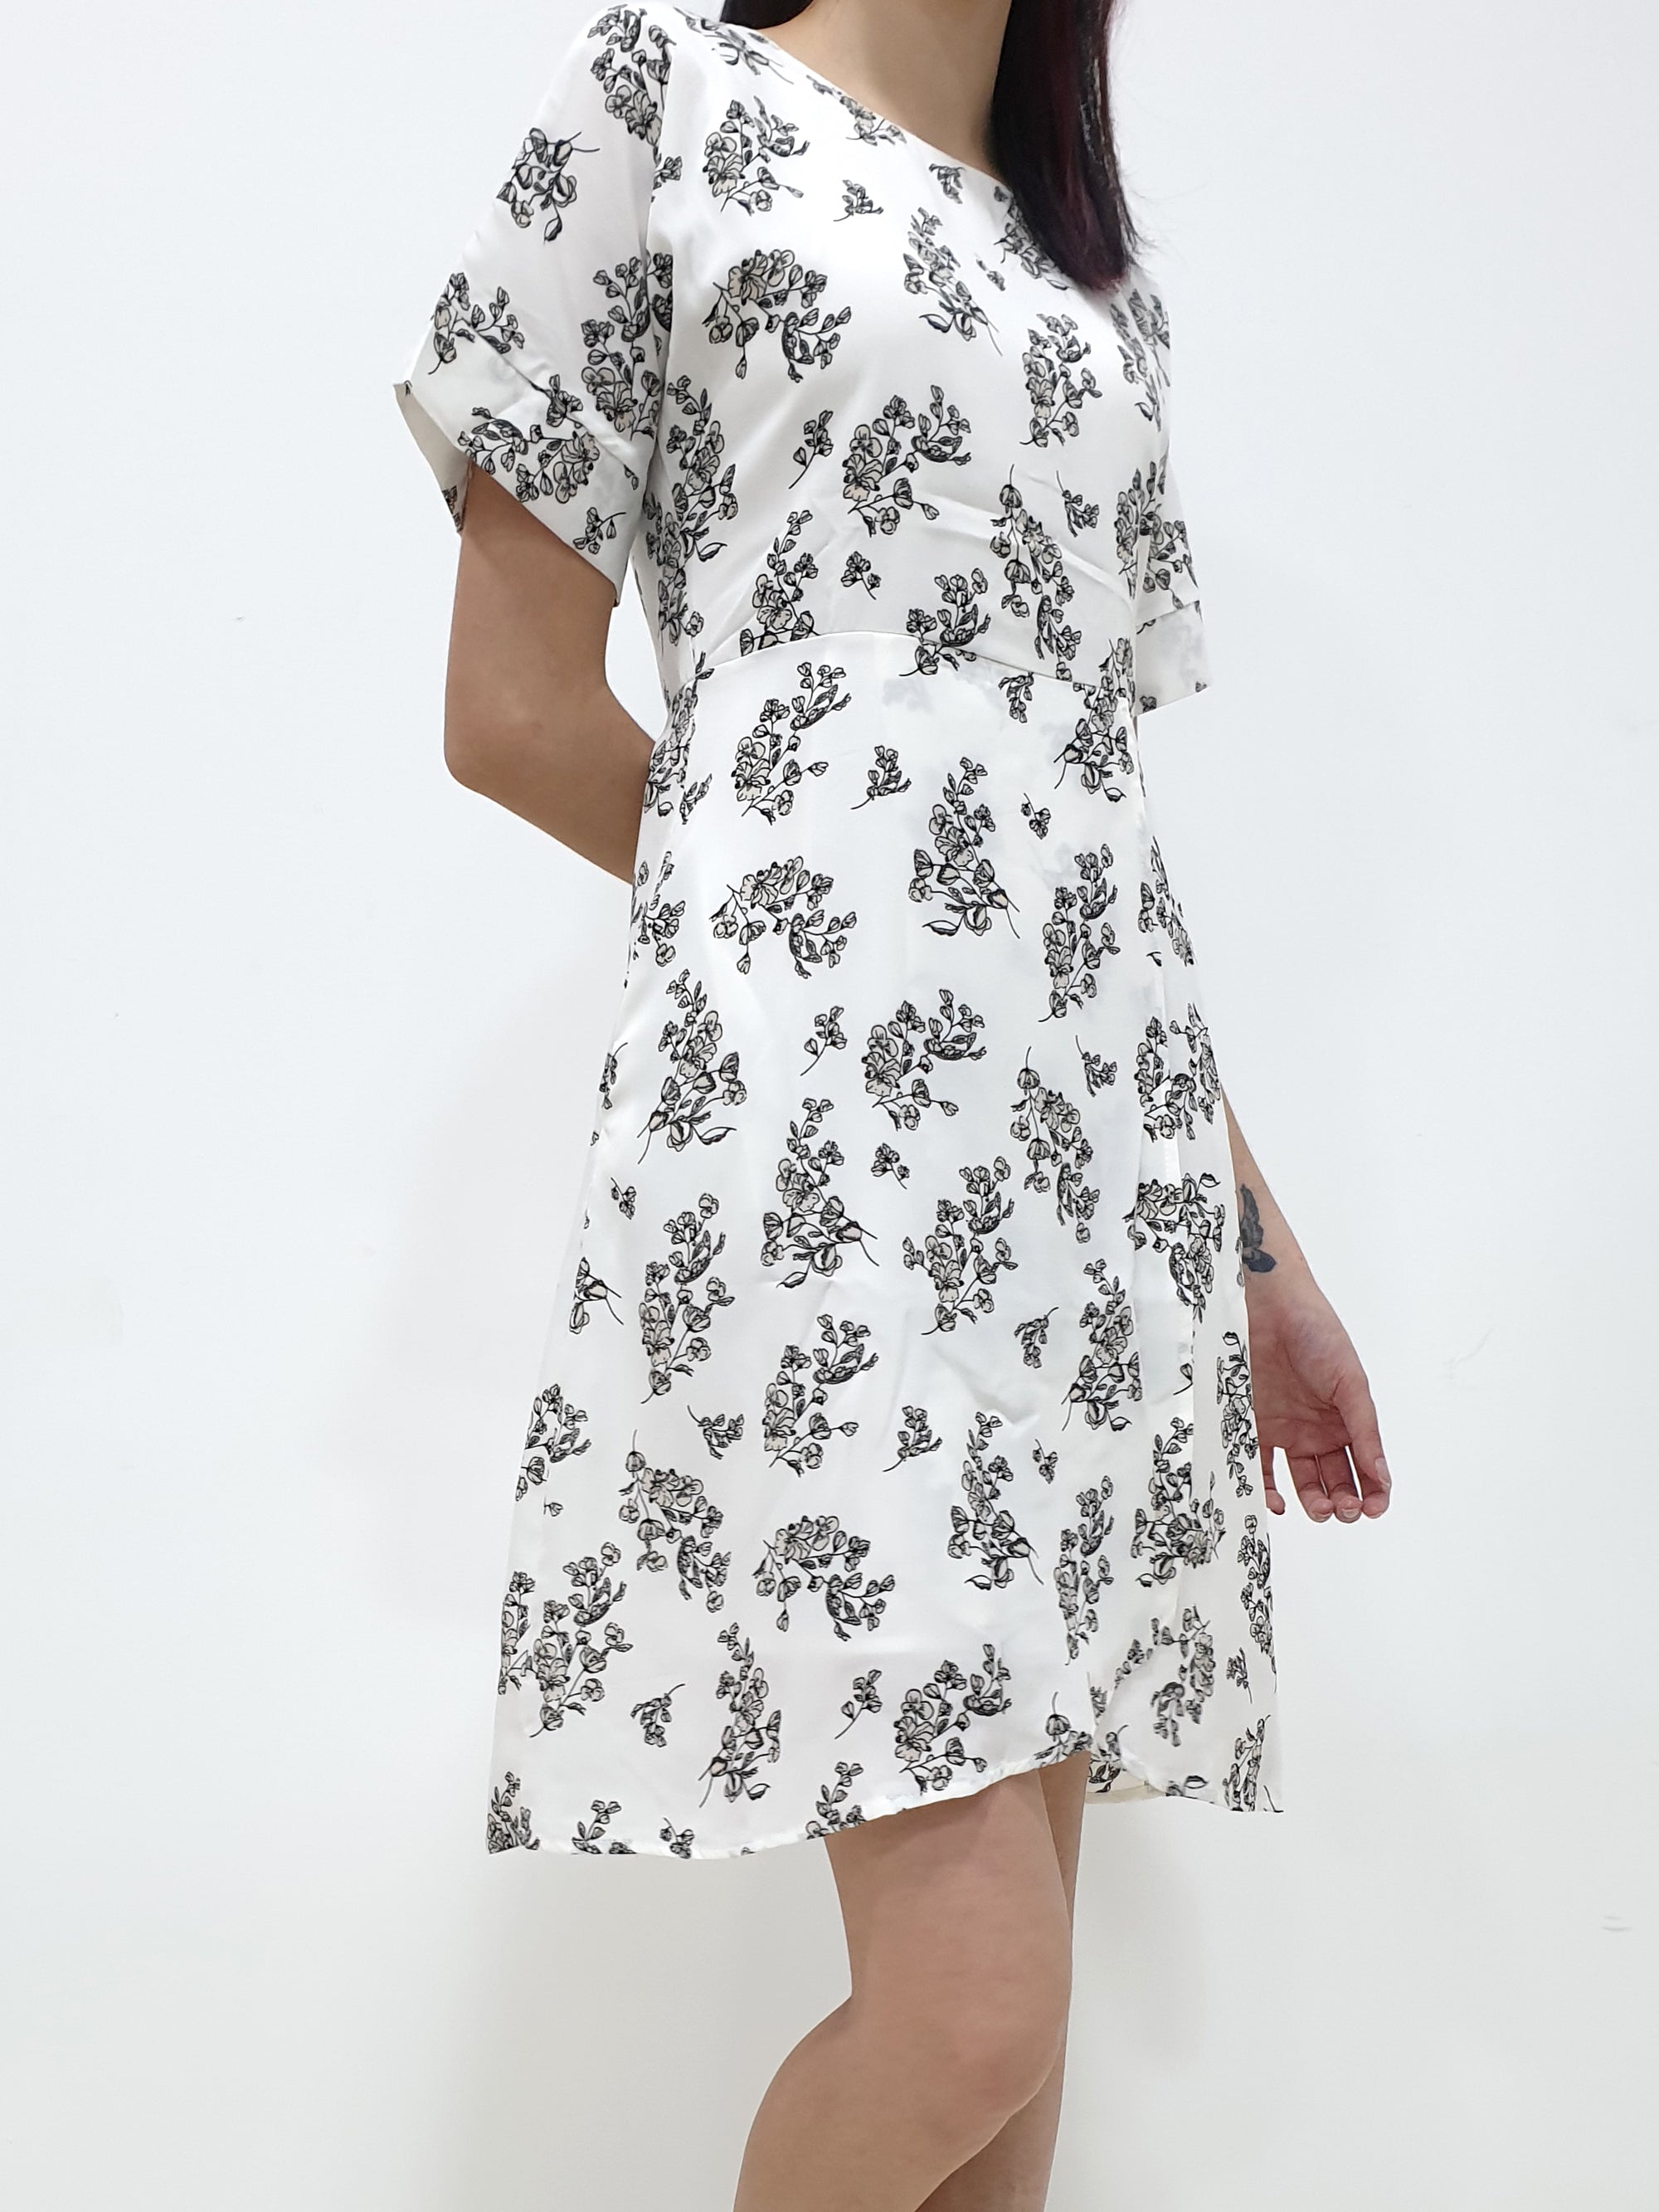 Floral Sleeved Dress (Non-returnable) - Ferlicious